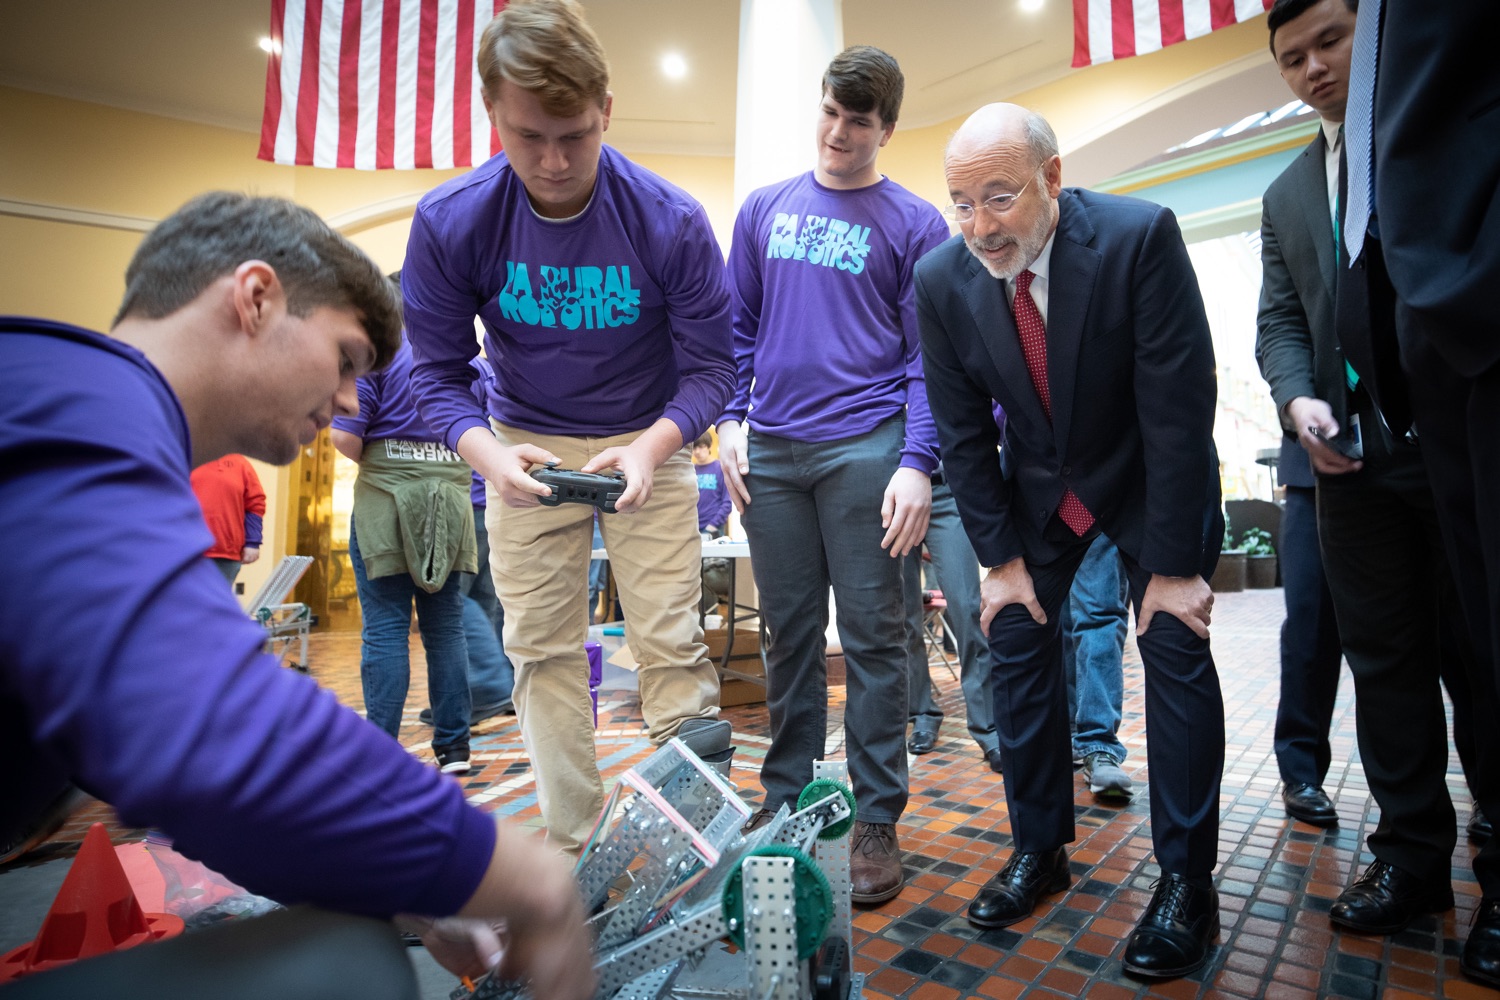 Pennsylvania Governor Tom Wolf meeting with students at the robotics demonstration.  Celebrating the success of the PAsmart workforce development program to create educational opportunities at schools across the commonwealth, Governor Tom Wolf welcomed more than 50 students from the Pennsylvania Rural Robotics Initiative to the Capitol today. The students from nine western Pennsylvania school districts showcased their skills in coding, robotics and drone technology. The Wolf administration awarded the initiative a $299,000 PAsmart Advancing Grant earlier this year. Harrisburg, PA  Tuesday, November 12, 2019<br><a href="https://filesource.amperwave.net/commonwealthofpa/photo/17587_gov_pasmart_rural_robotics_dz_016.jpg" target="_blank">⇣ Download Photo</a>